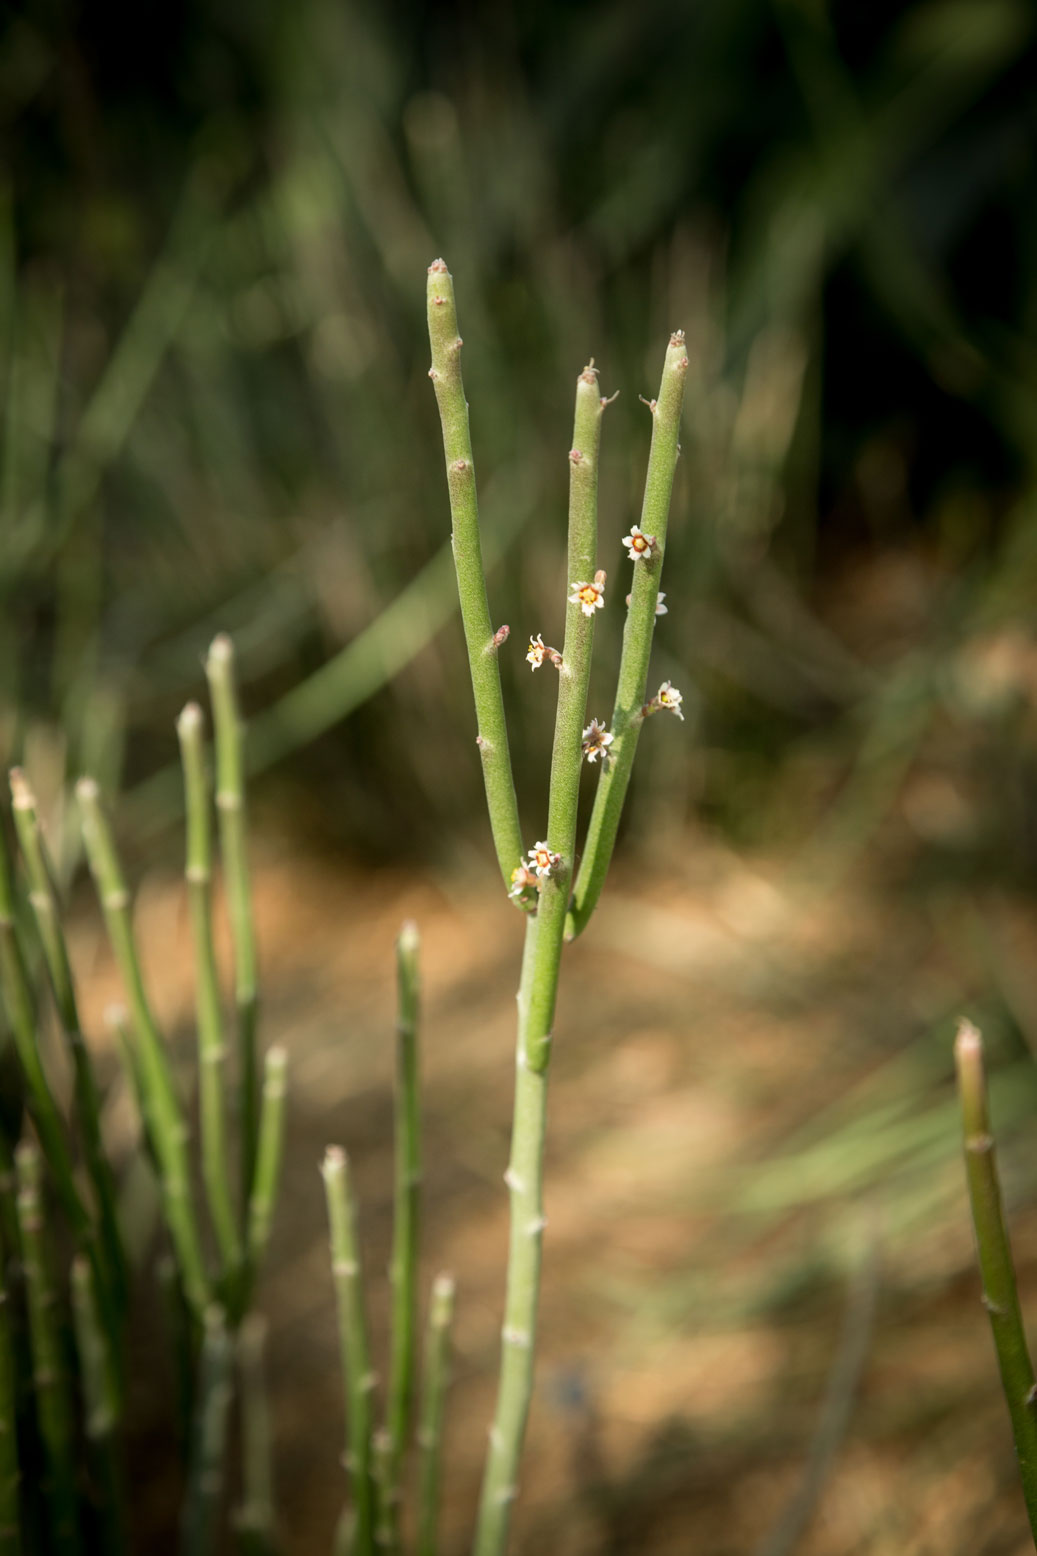 A close-up of the pencil-thin stems of the Candelilla plant without blooms.